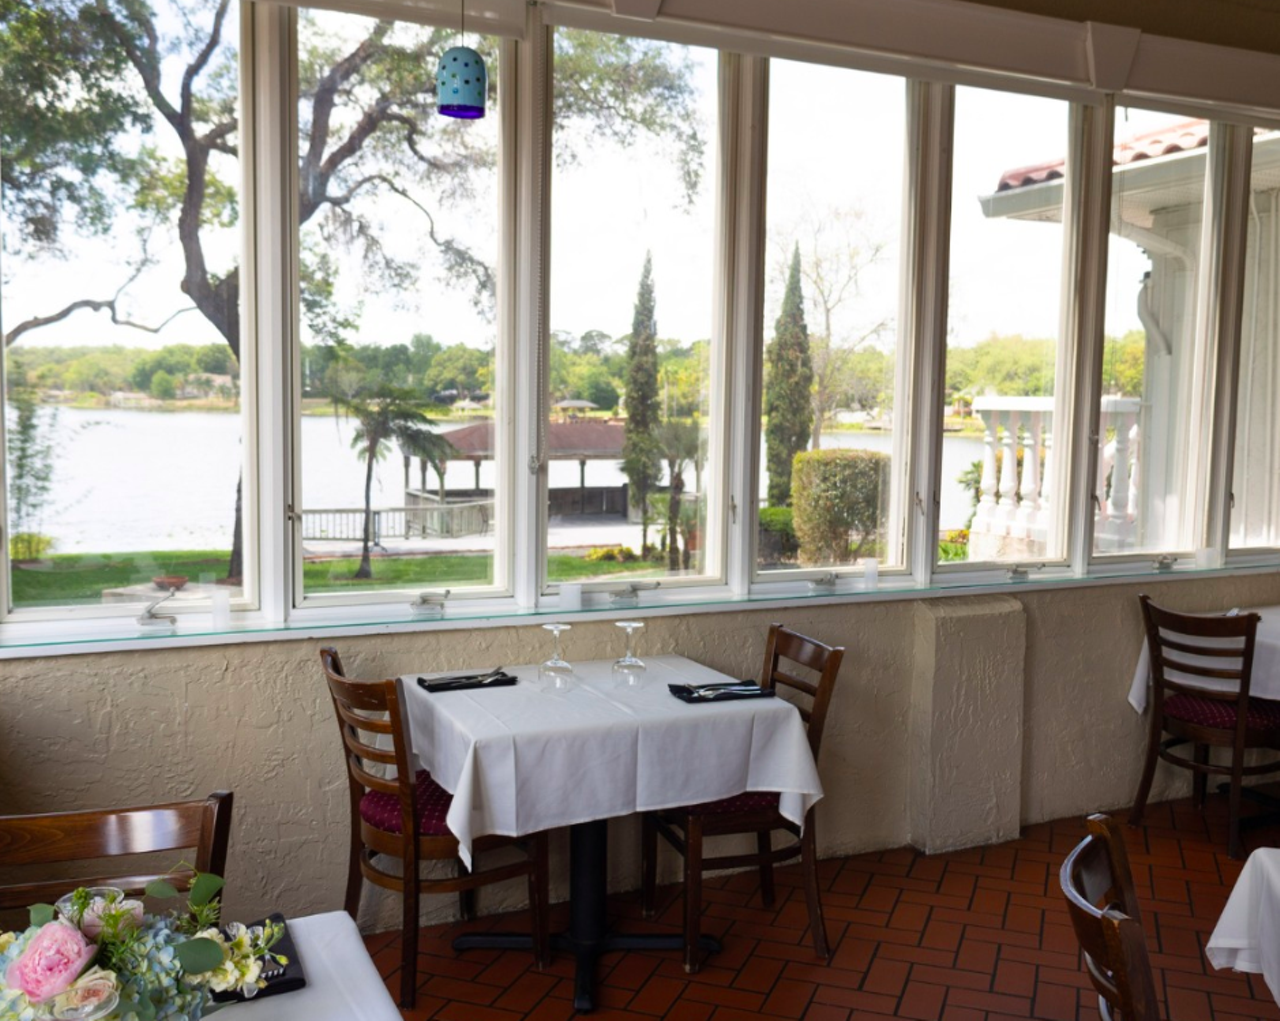 Enzo's on the Lake
1130 S. U.S. Highway 17-92, Longwood
Enzo’s on the Lake got its start in a humble Central Florida home in 1980. Over the years, the restaurant has become the area's go-to romantic date destination, serving Italian cuisine with a chic twist.